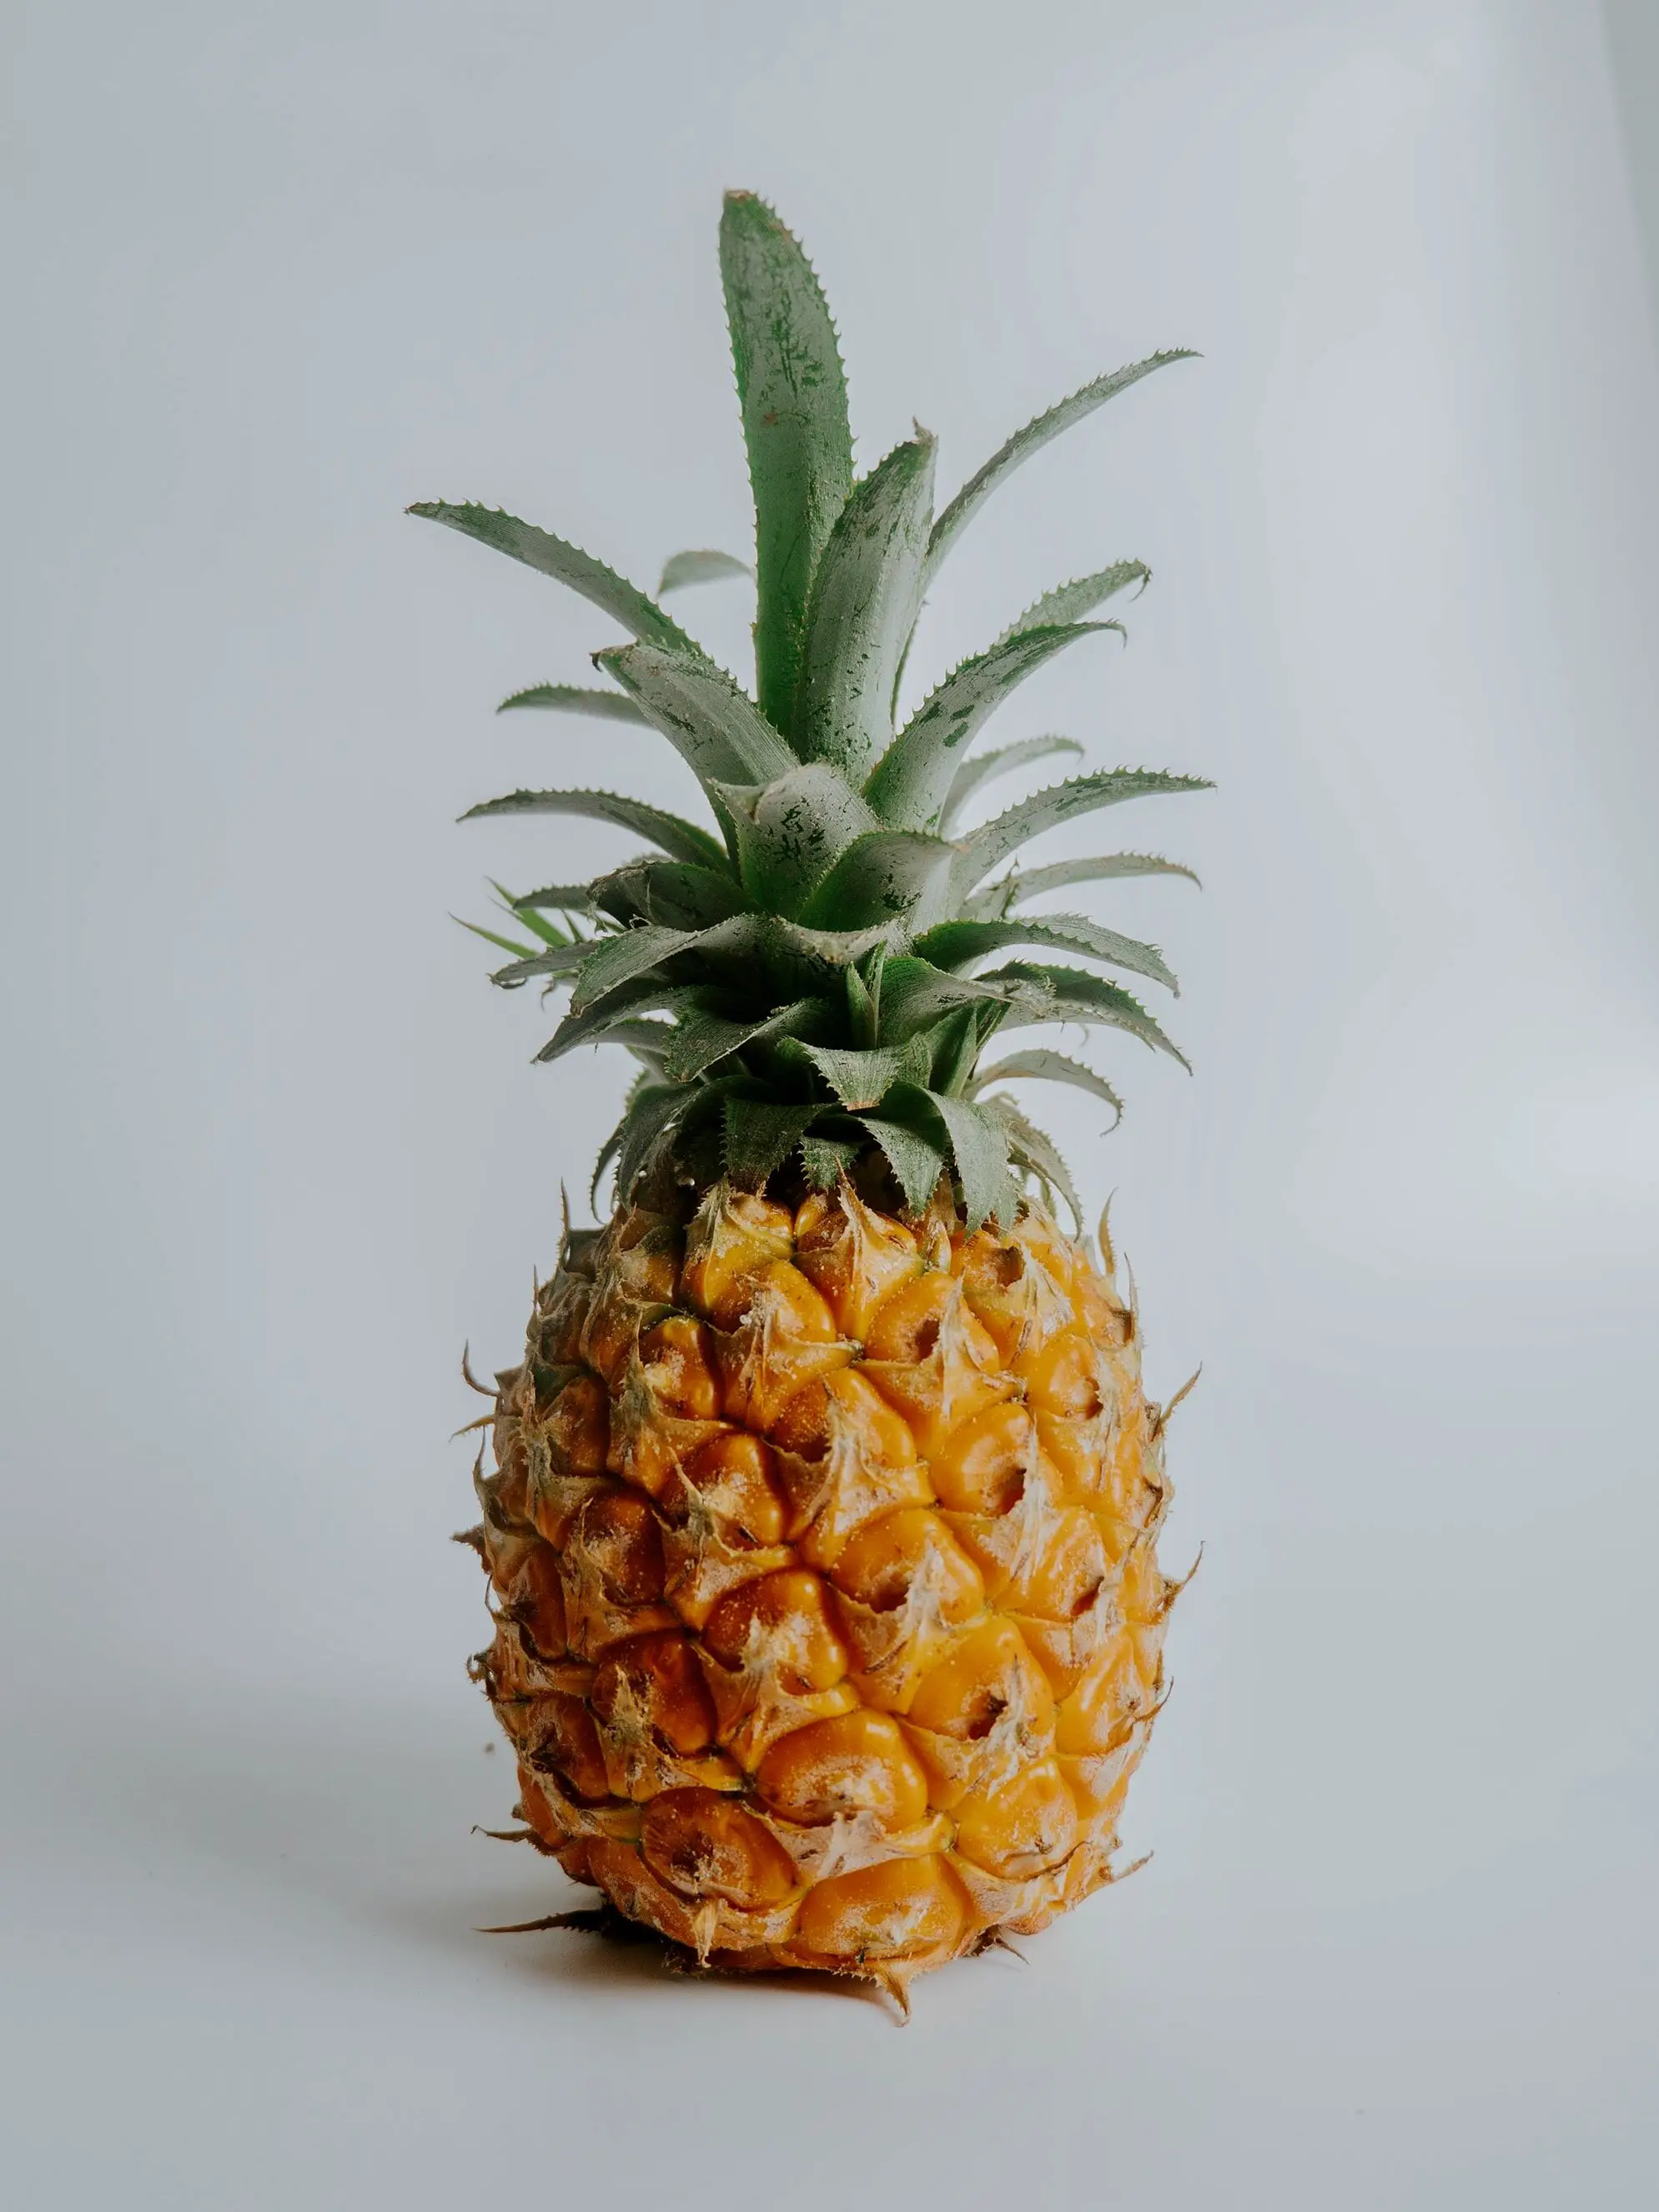 Biblical Significance Of Pineapple